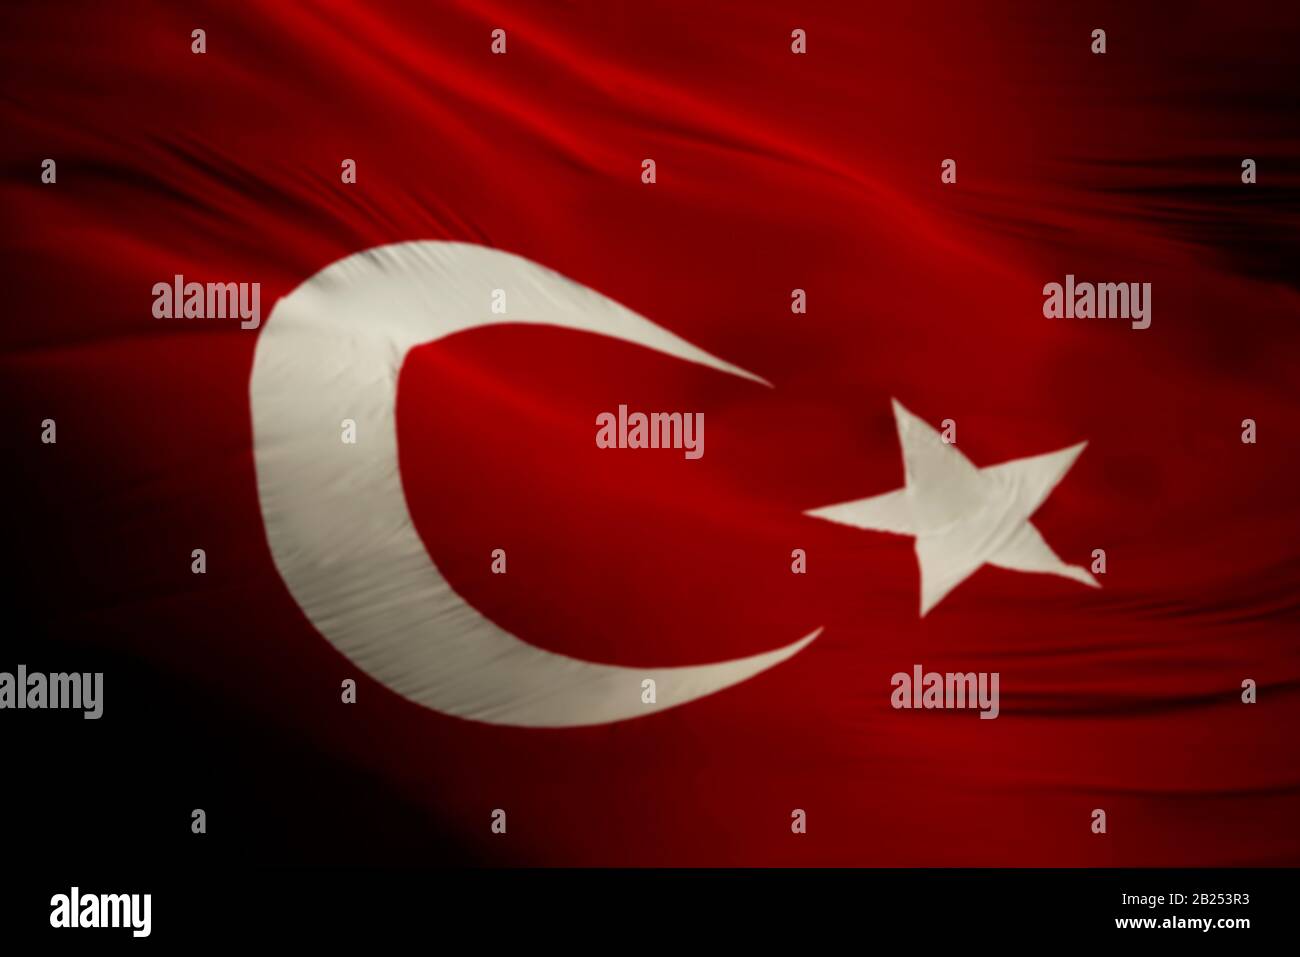 Photo of Glorious Real Turkish flag background texture waving with real wrinkles on it. Stock Photo